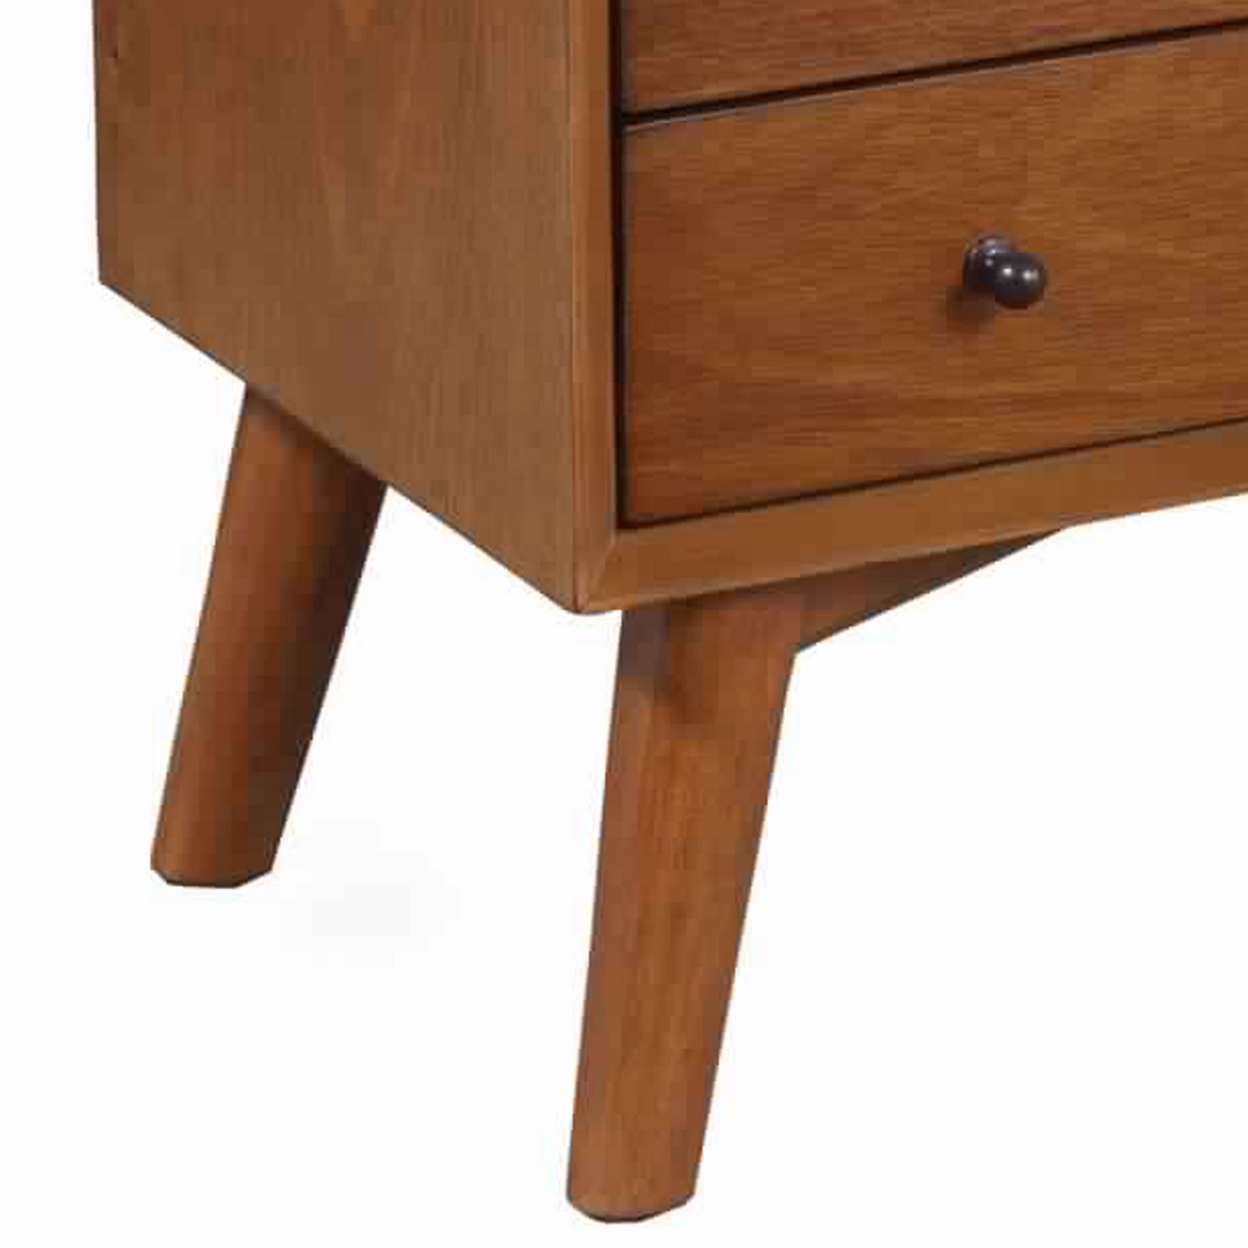 2 Drawer Wooden Nightstand With Open Compartment And Splayed Legs, Brown- Saltoro Sherpi